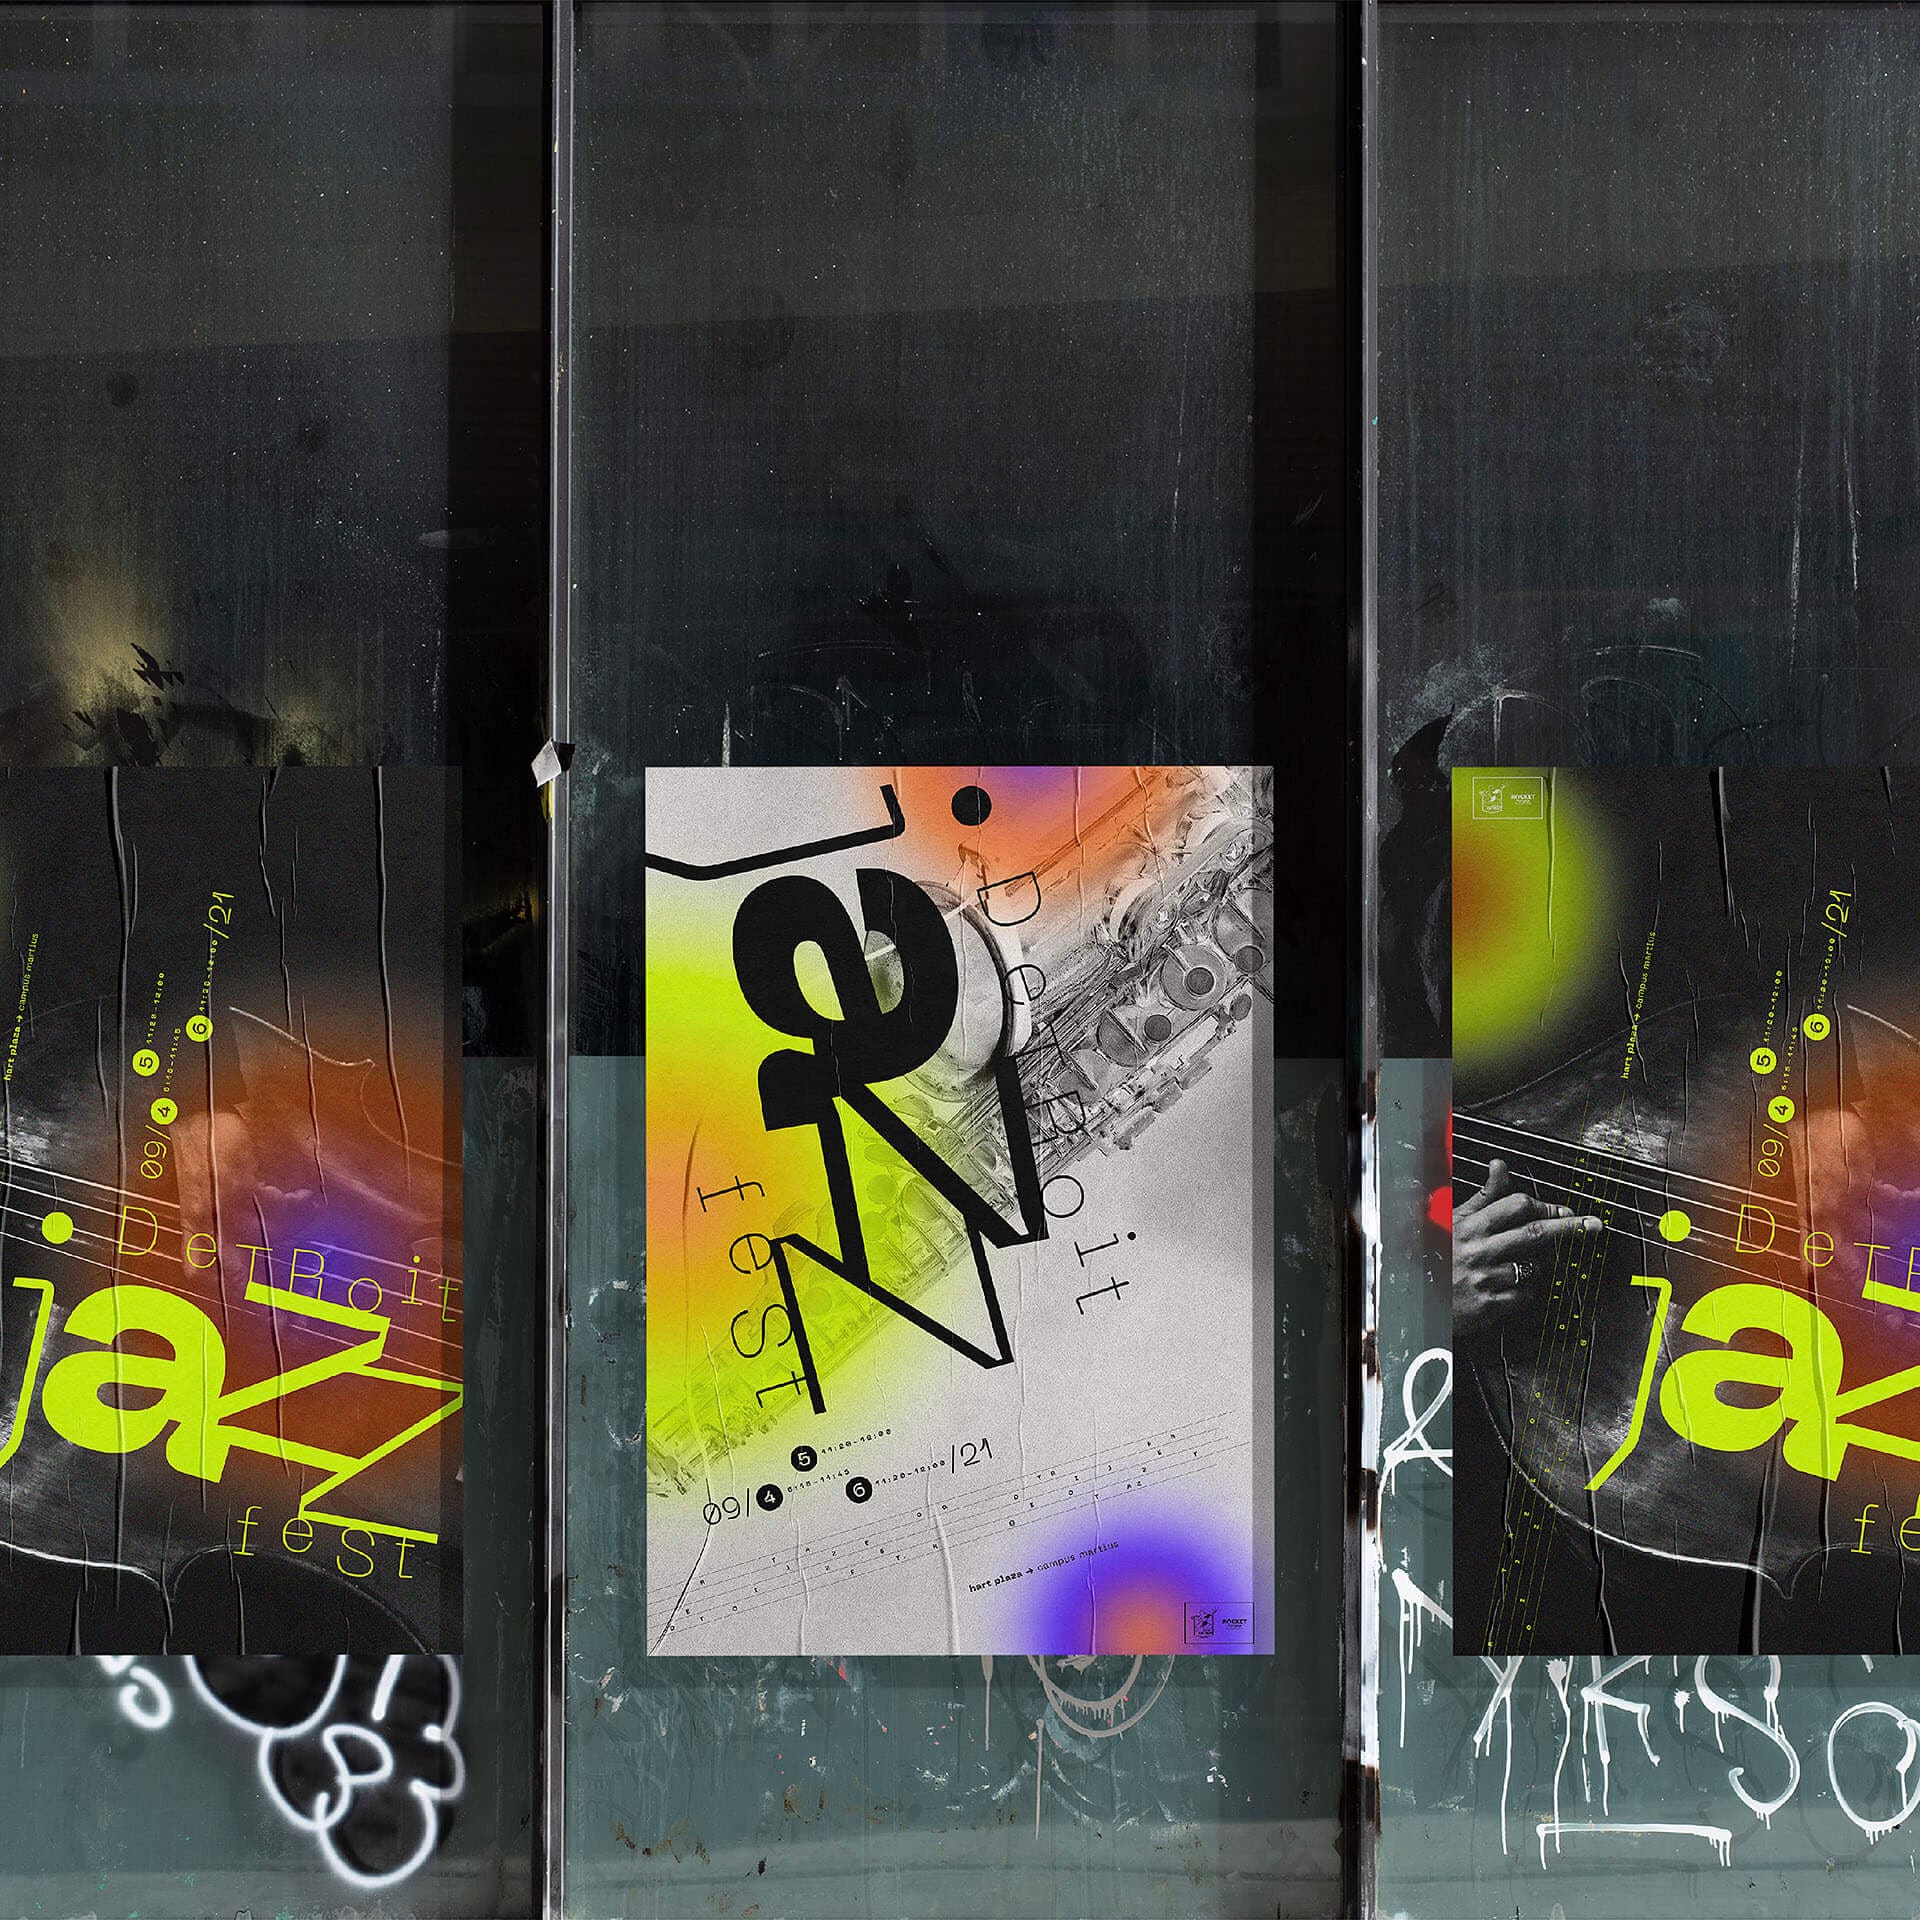 Poster for an event identity. Photo of three posters an a graffitied green metal wall. The posters are either black or white with yellow, blue, orange, and purple gradient circles on top of an instrument. Large black or yellow text says "Detroit Jazz Fest".